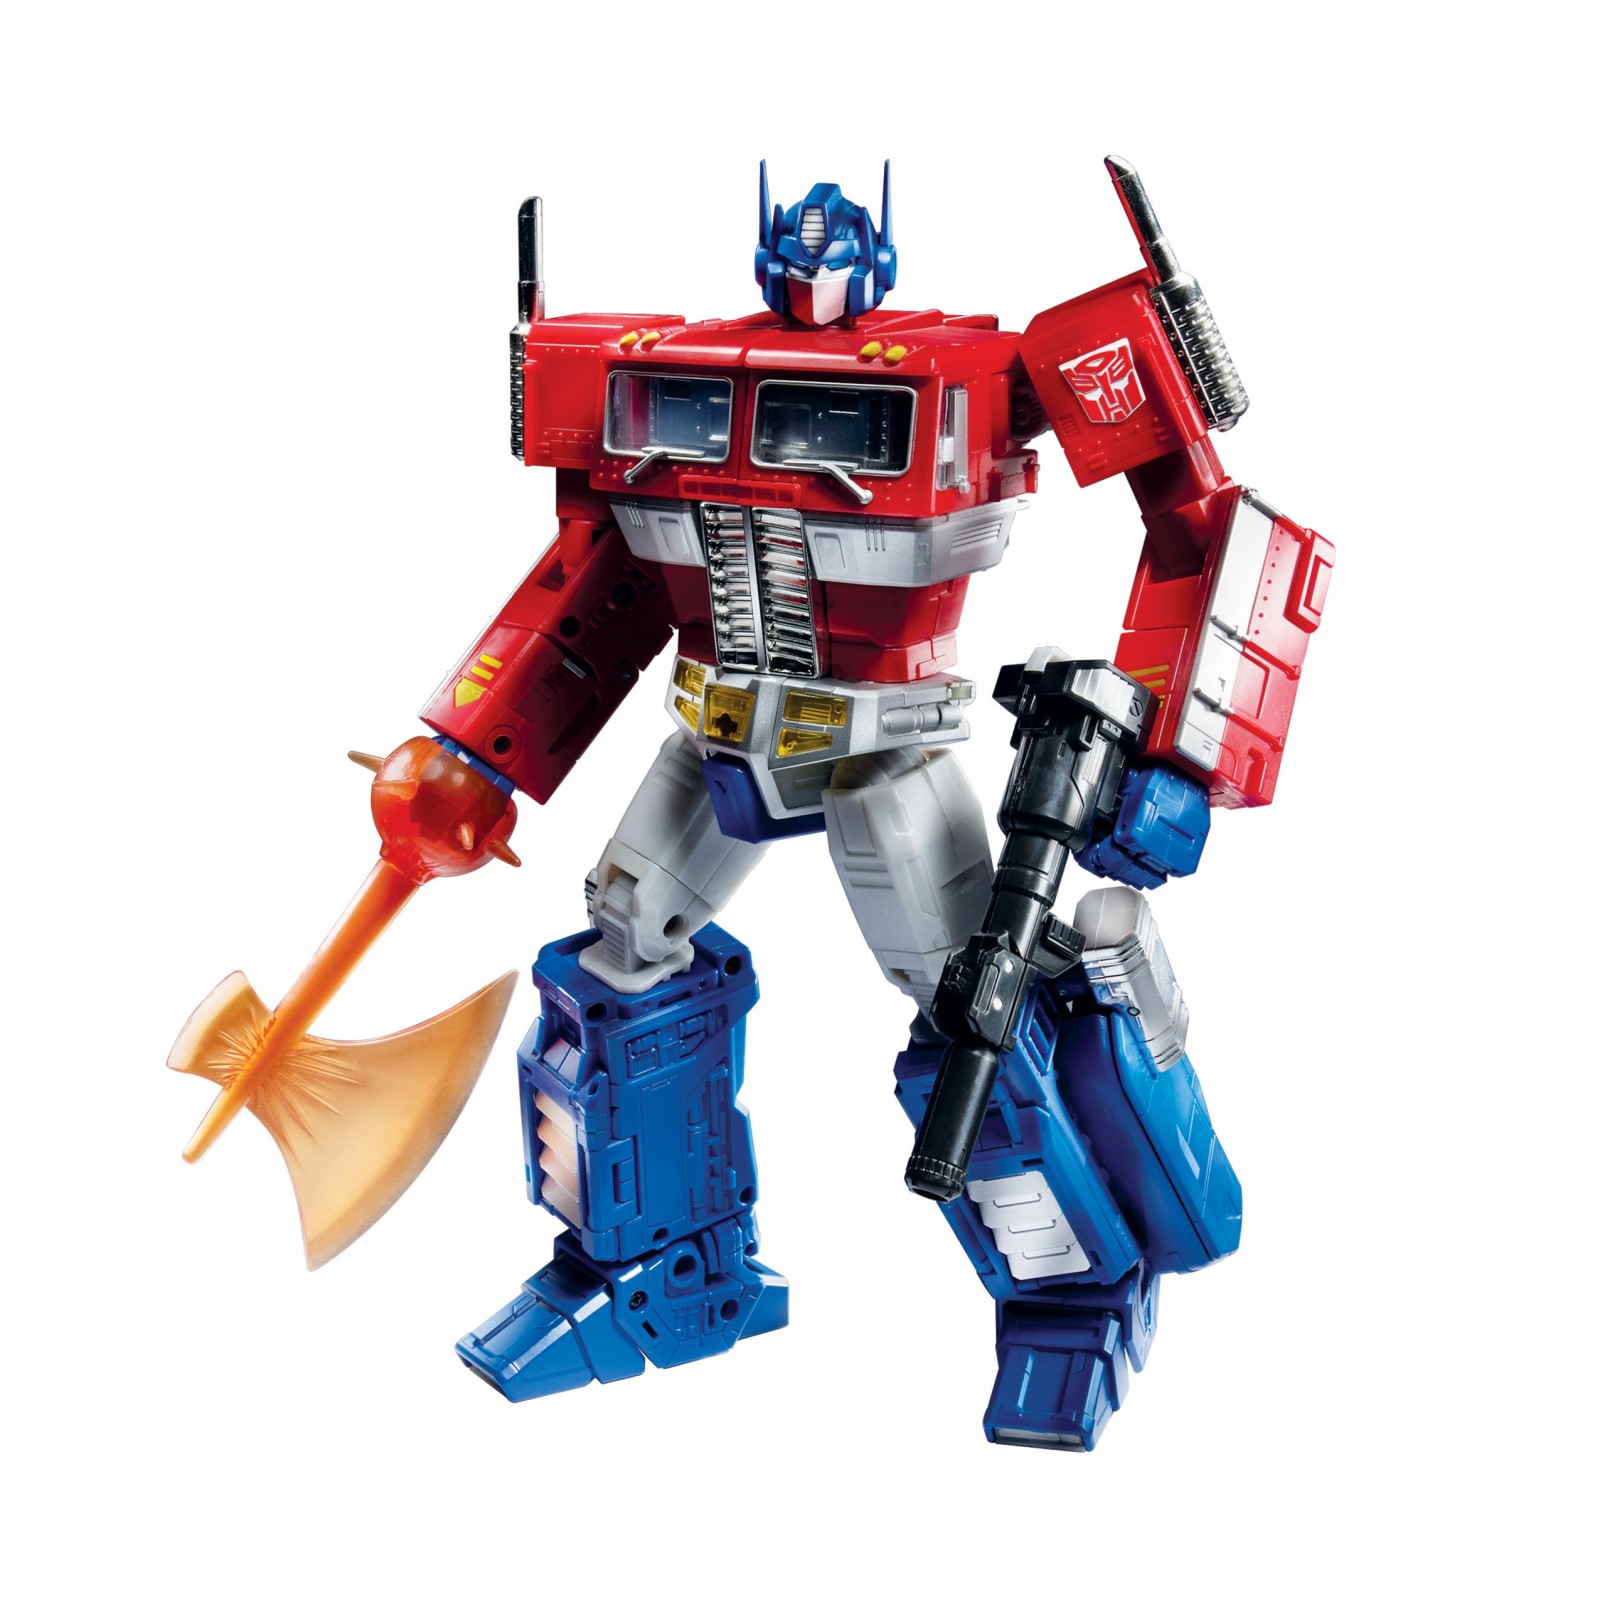 Transformers News: Here's where Hasbro's Masterpiece Optimus Prime will be available